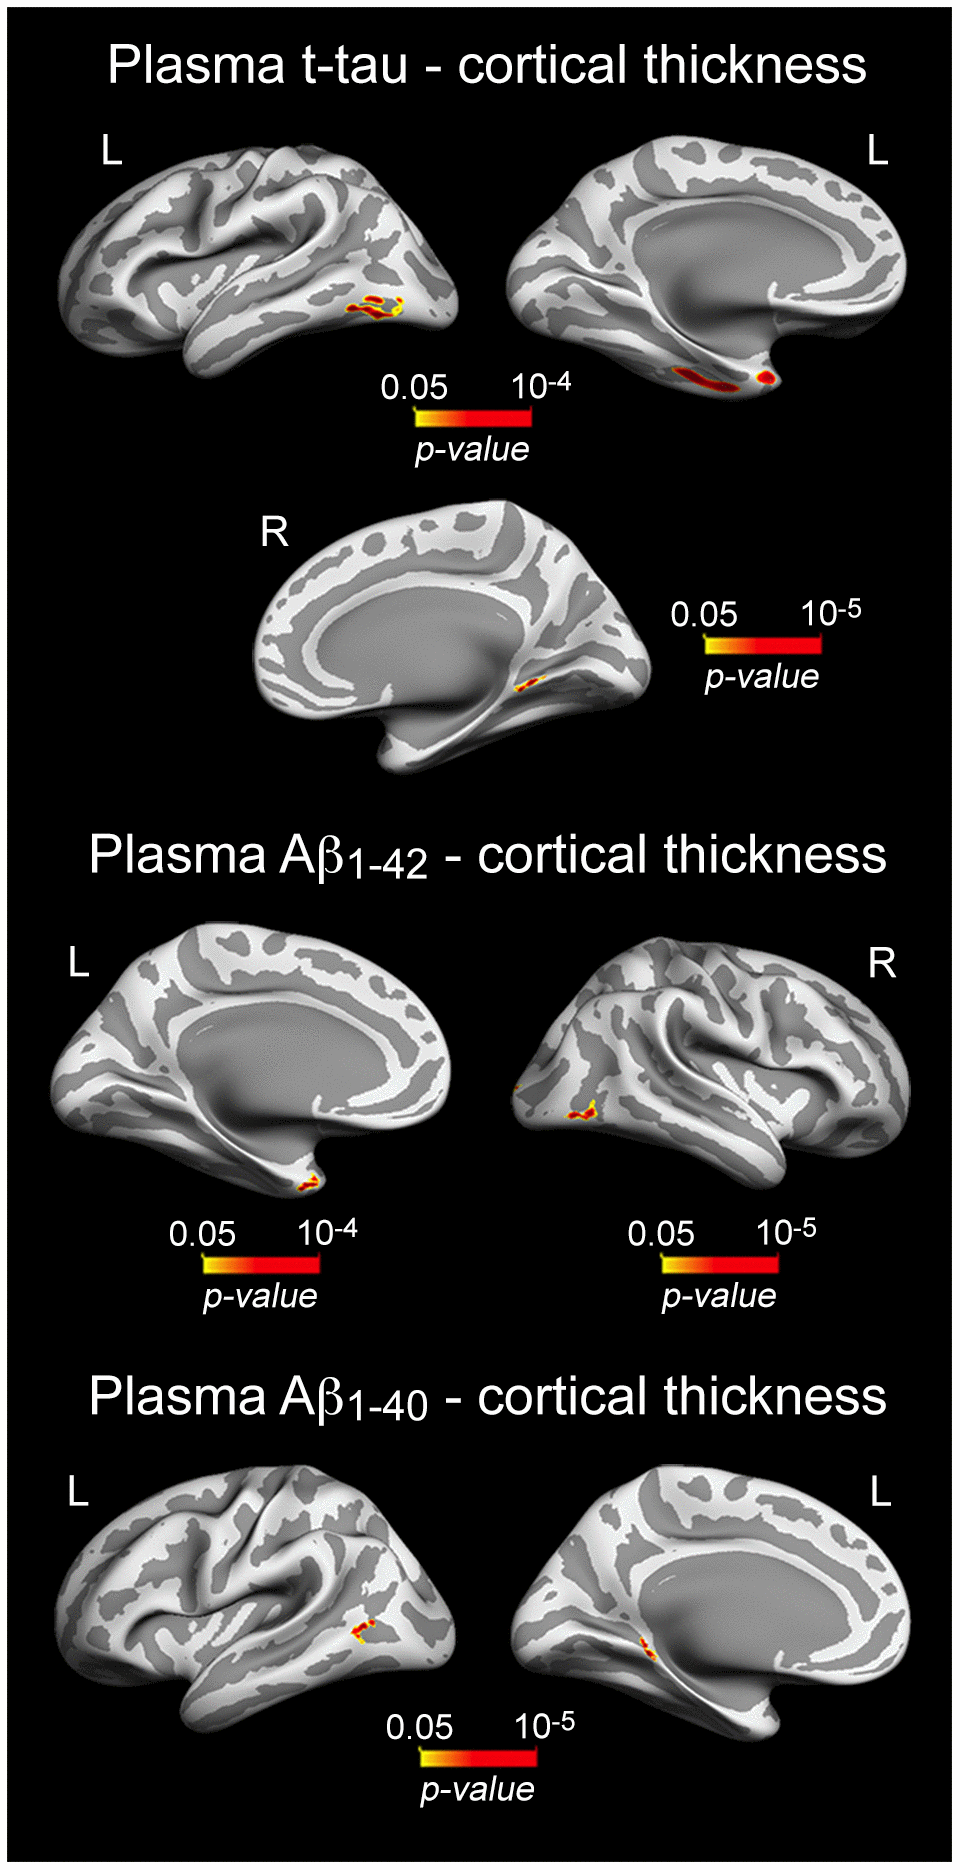 Significant associations between increased plasma t-tau/Aβ1-40/Aβ1-42 and patterns of cortical thinning. Results are represented on inflated cortical surfaces. Left (L) and right (R). The color scale bar illustrates the range of significant p-values.